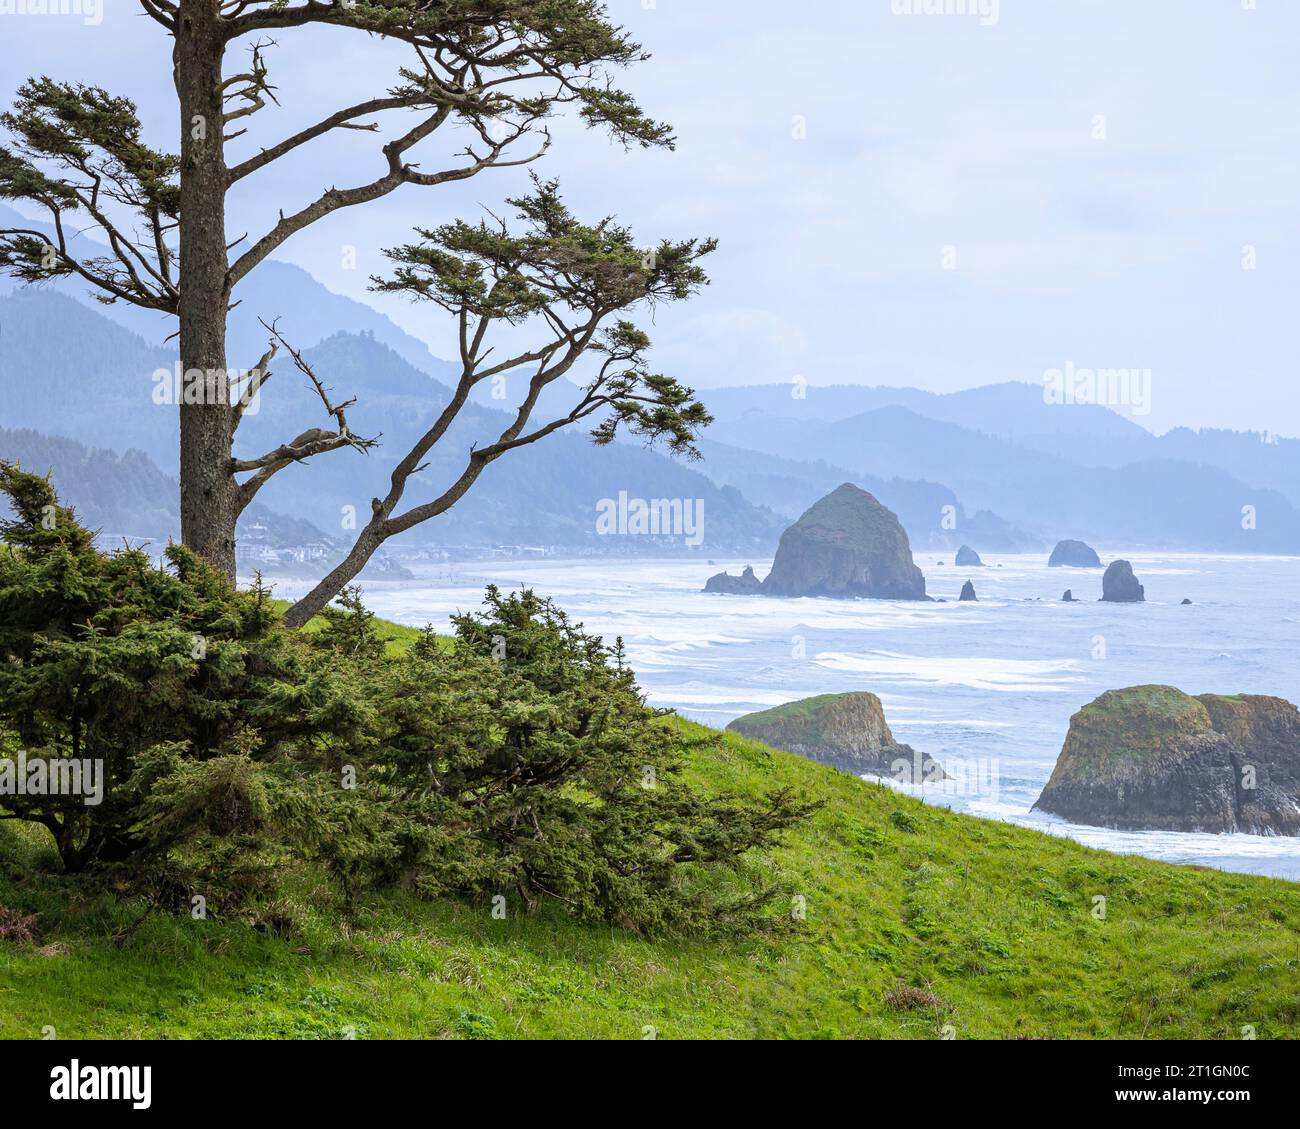 Cannon Beach as seen from Ecola State Park on the Oregon Coast, USA. Stock Photo